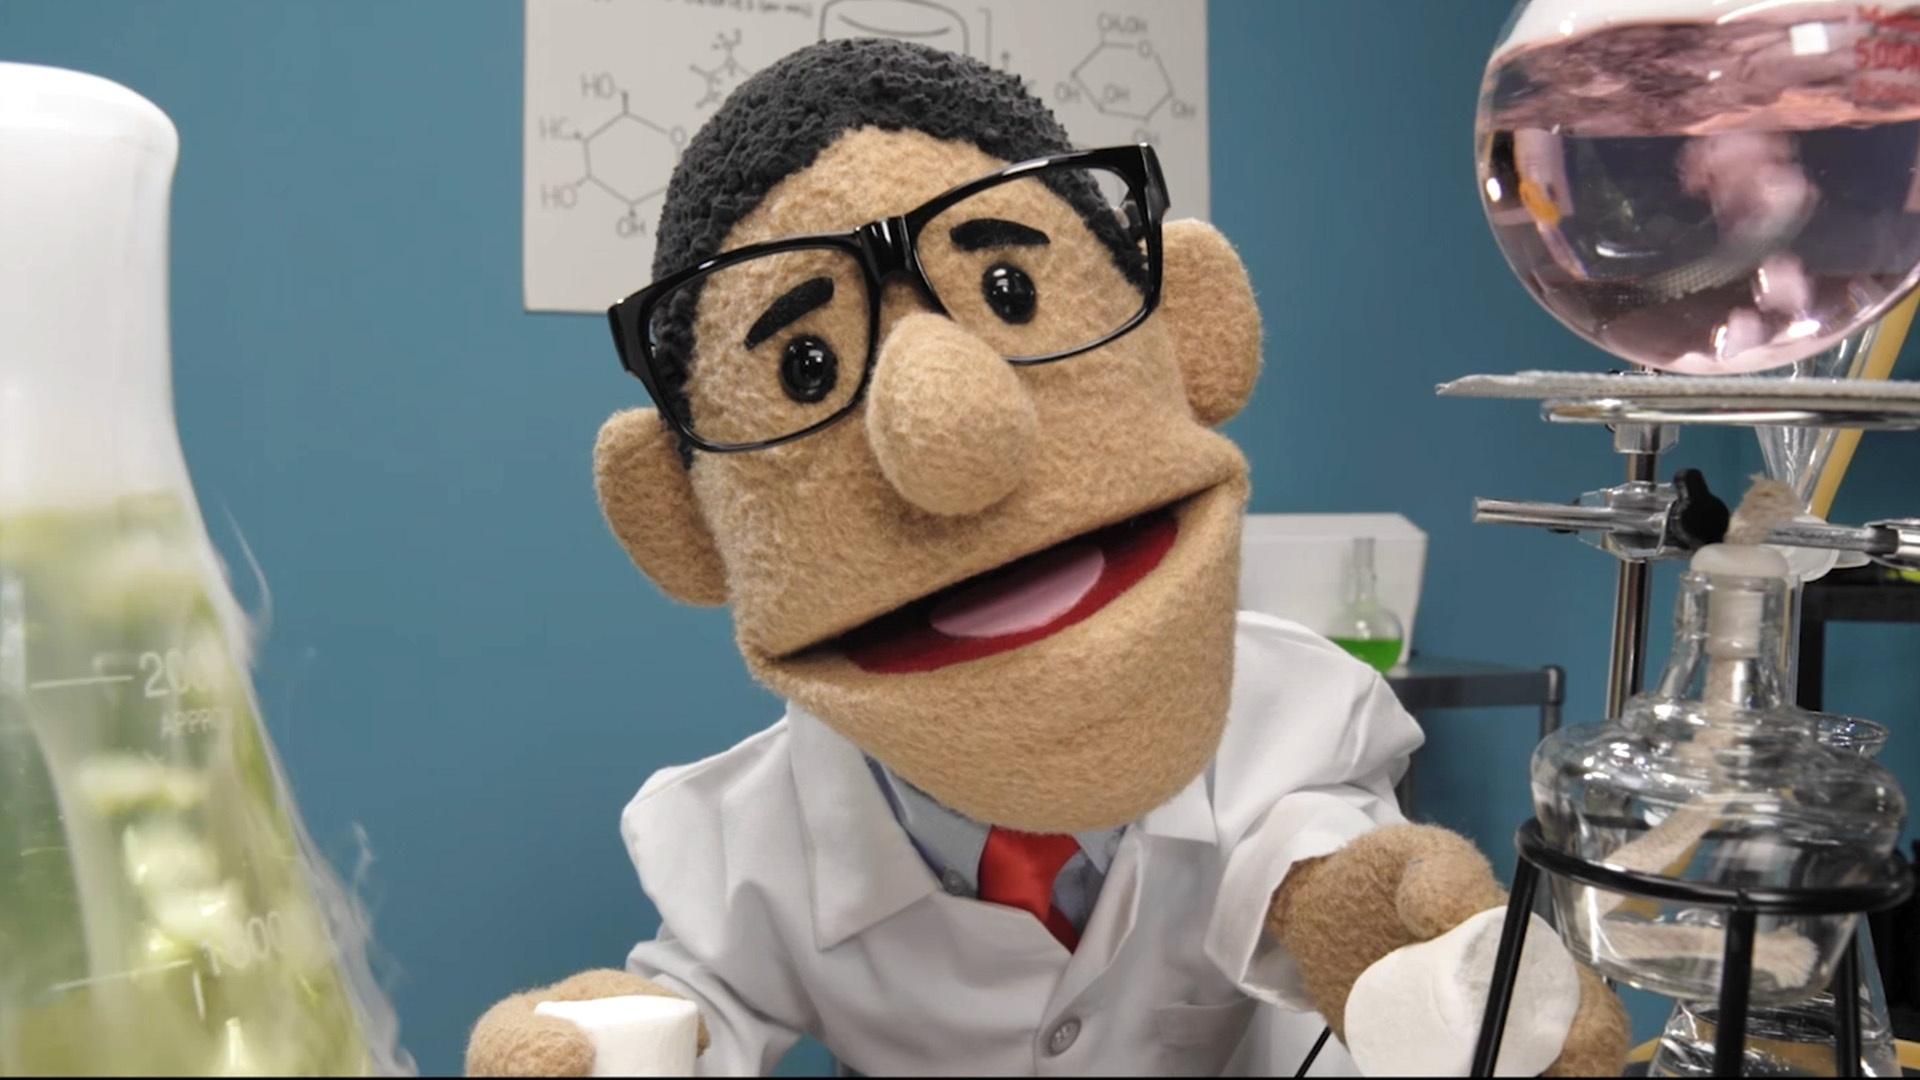 A puppet with glasses in a white lab coat stands behind laboratory equipment.